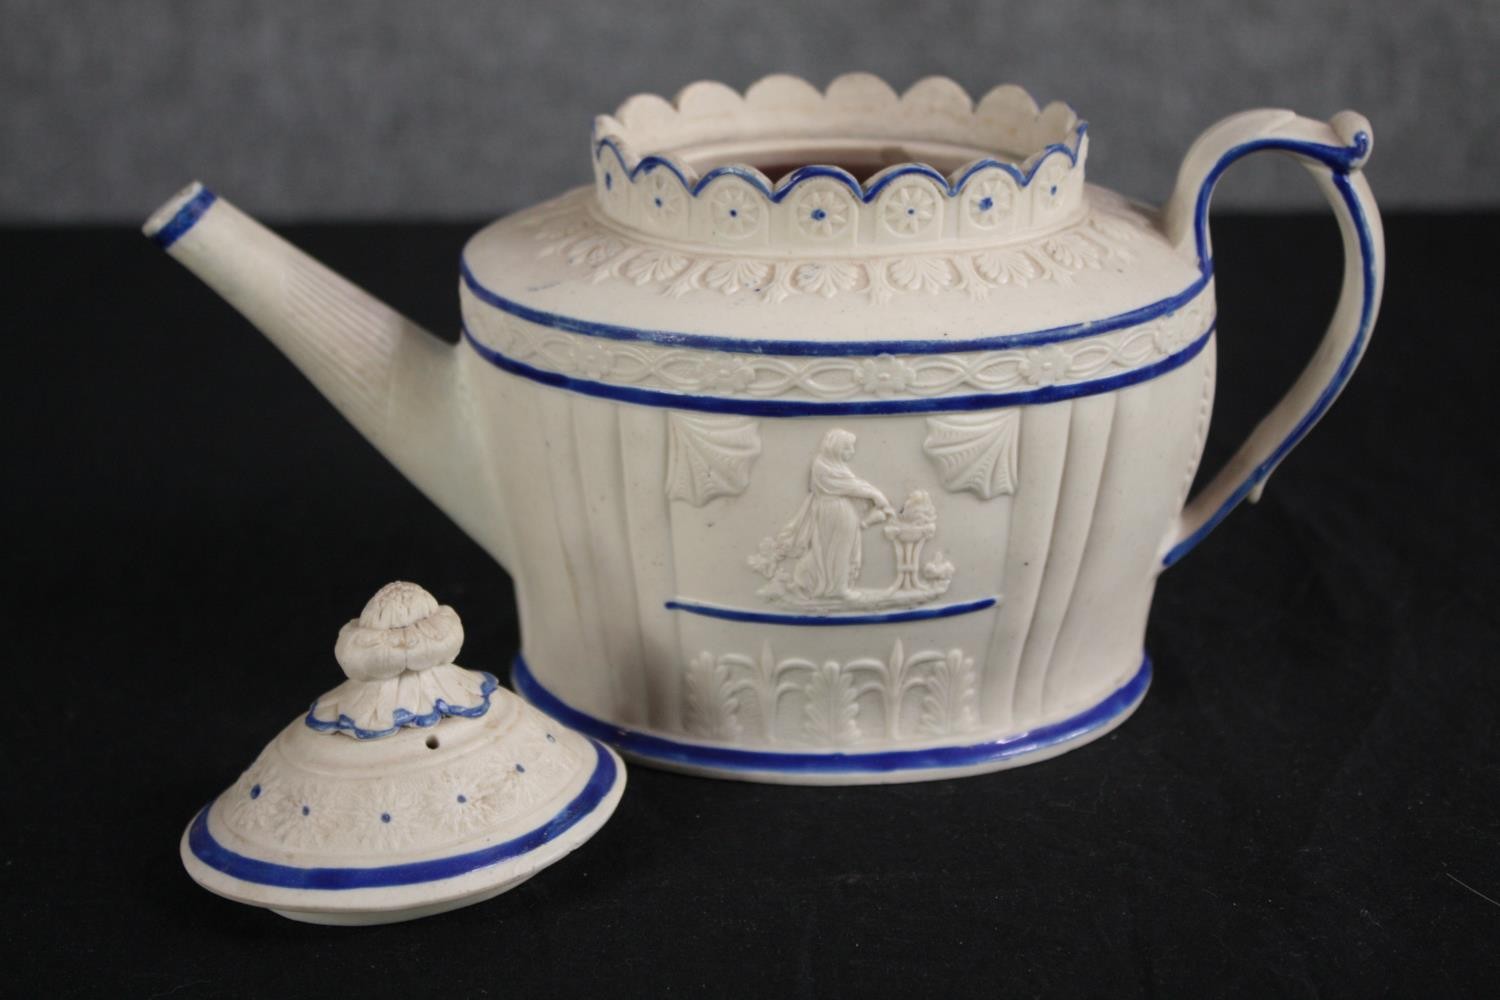 Castleford teapot. Circa 1810. Decorated with an arcade of classical scenes of figures. White and - Image 2 of 4